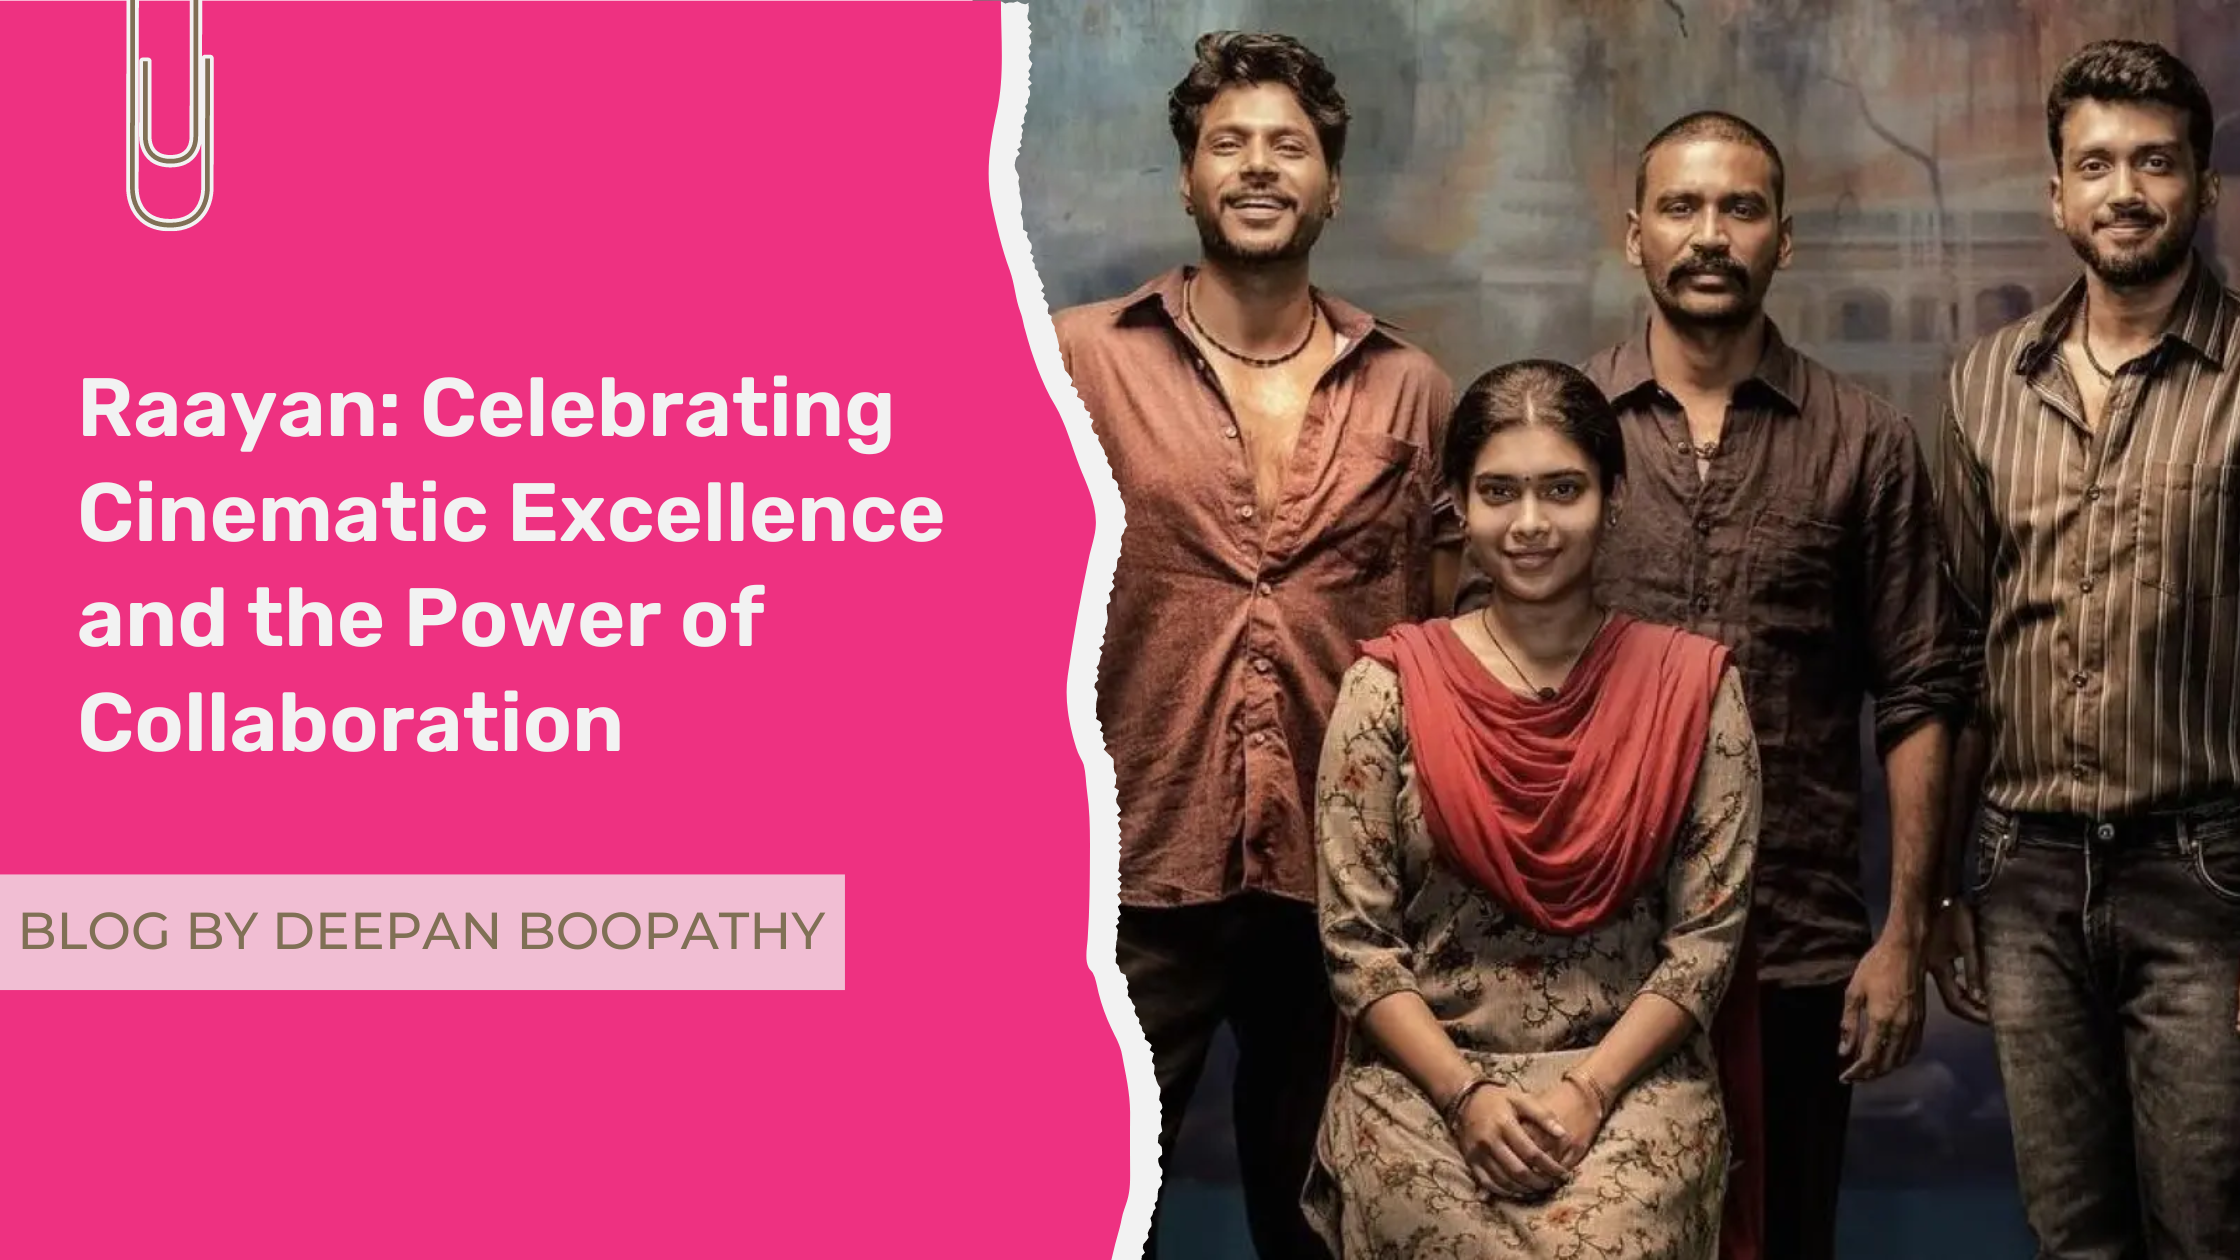 Raayan: Celebrating Cinematic Excellence and the Power of Collaboration